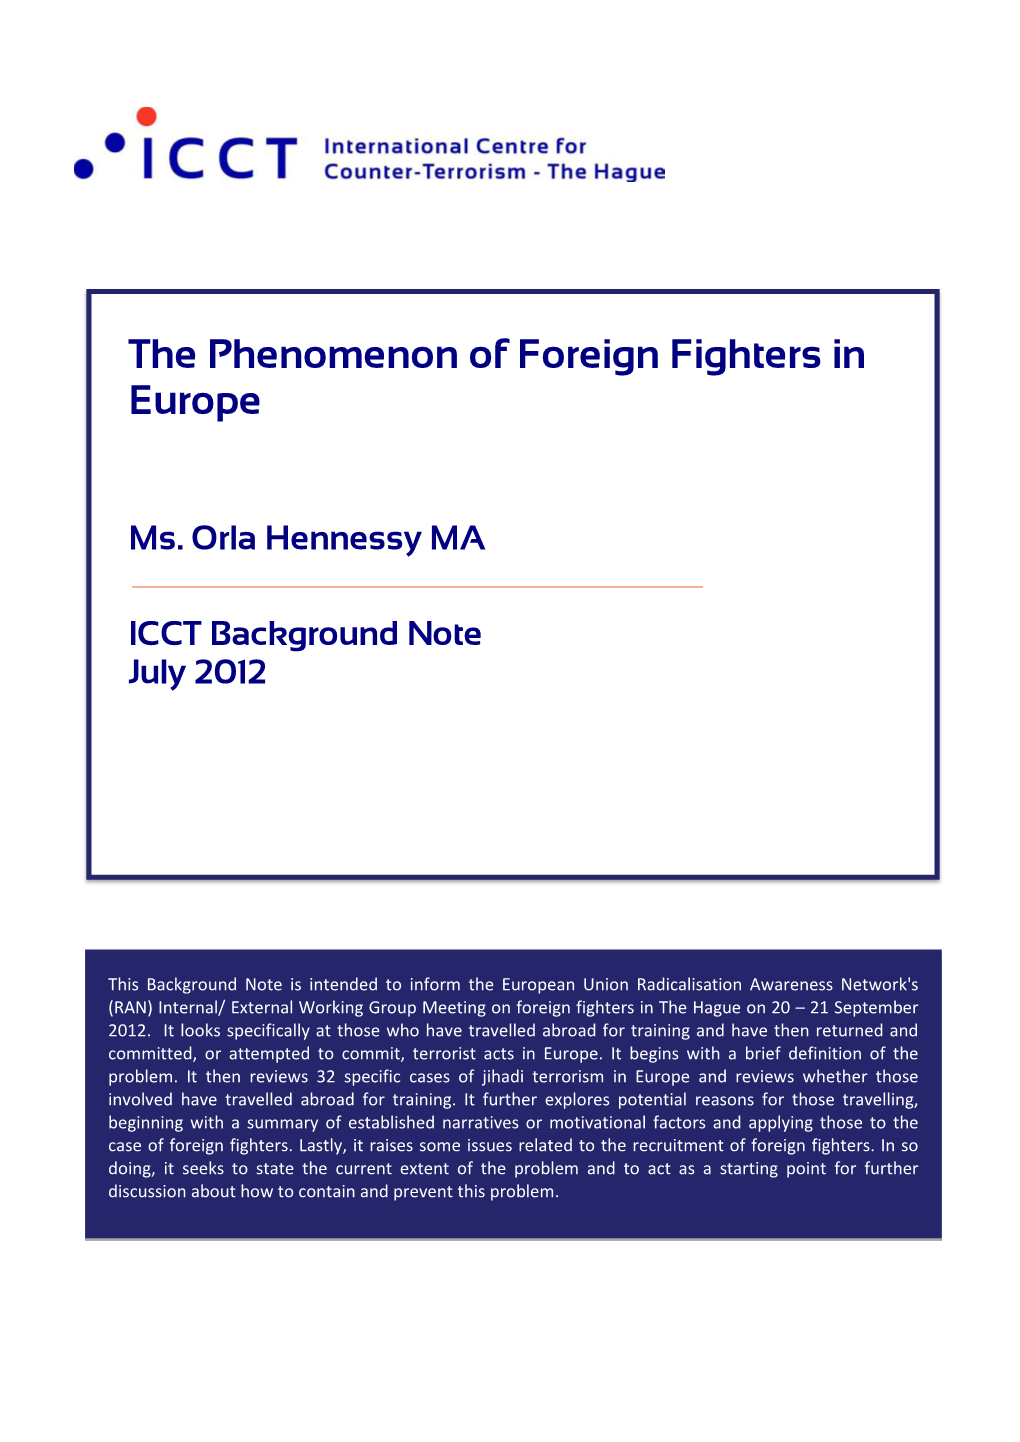 Foreign Fighters in Europe